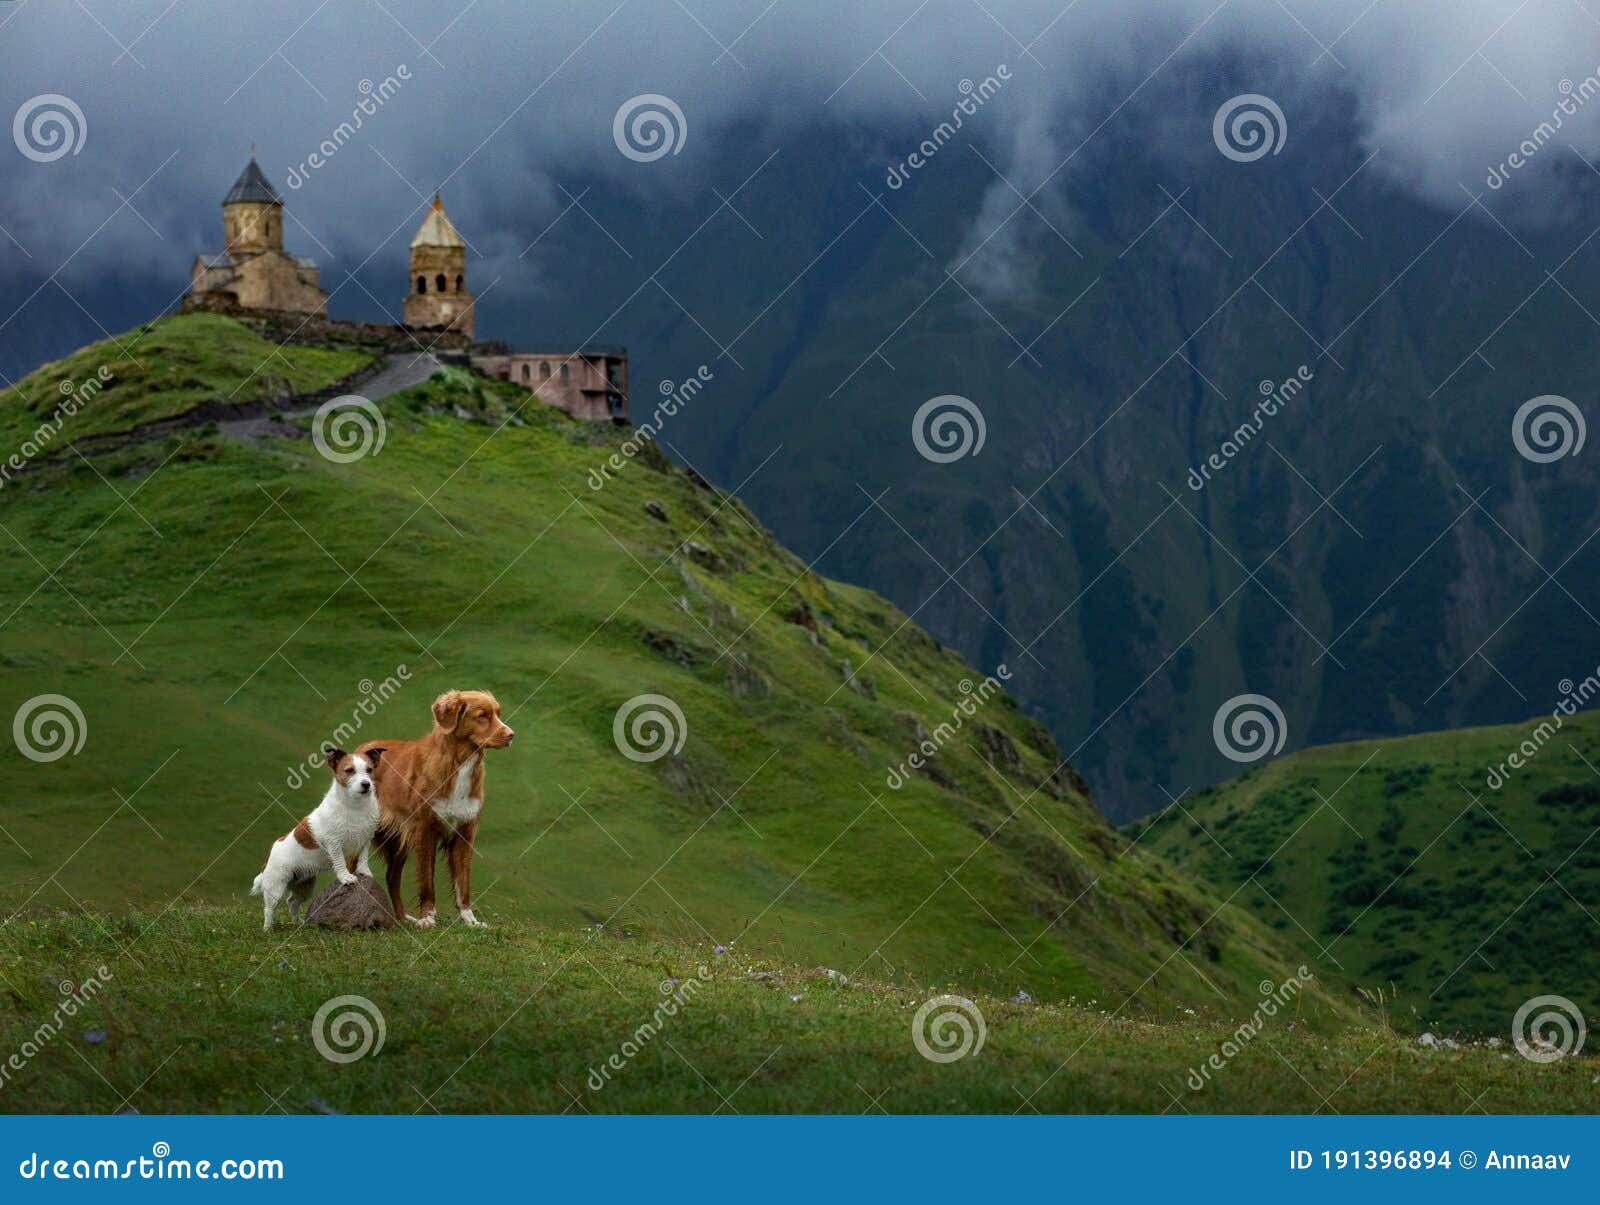 two dogs in travel. mountain view. landscape with a pet